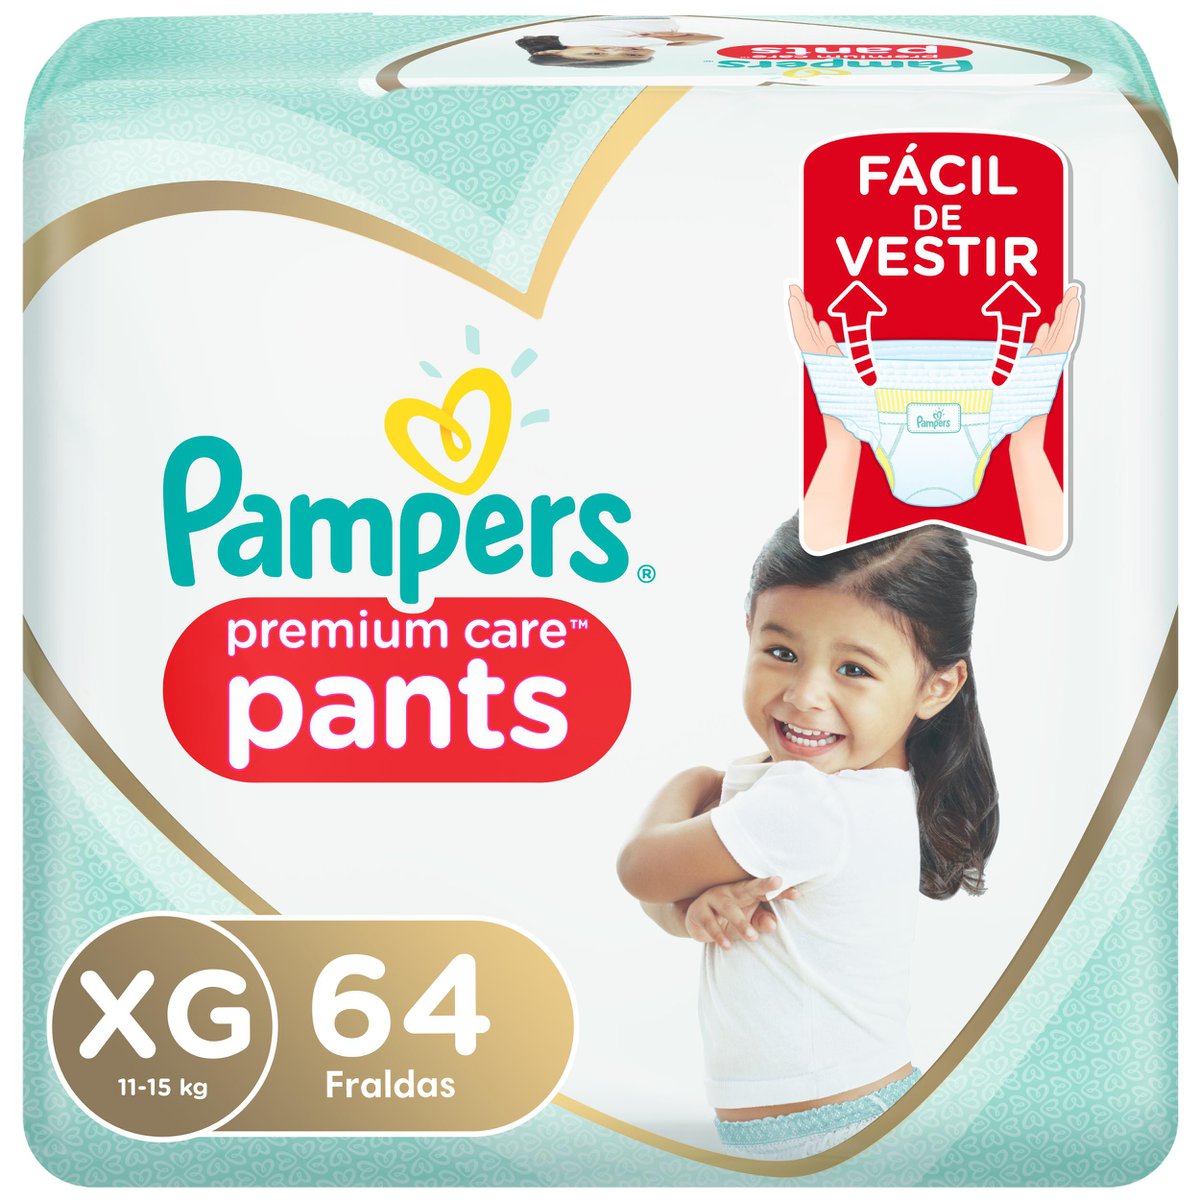 pampers active baby 4+ 53